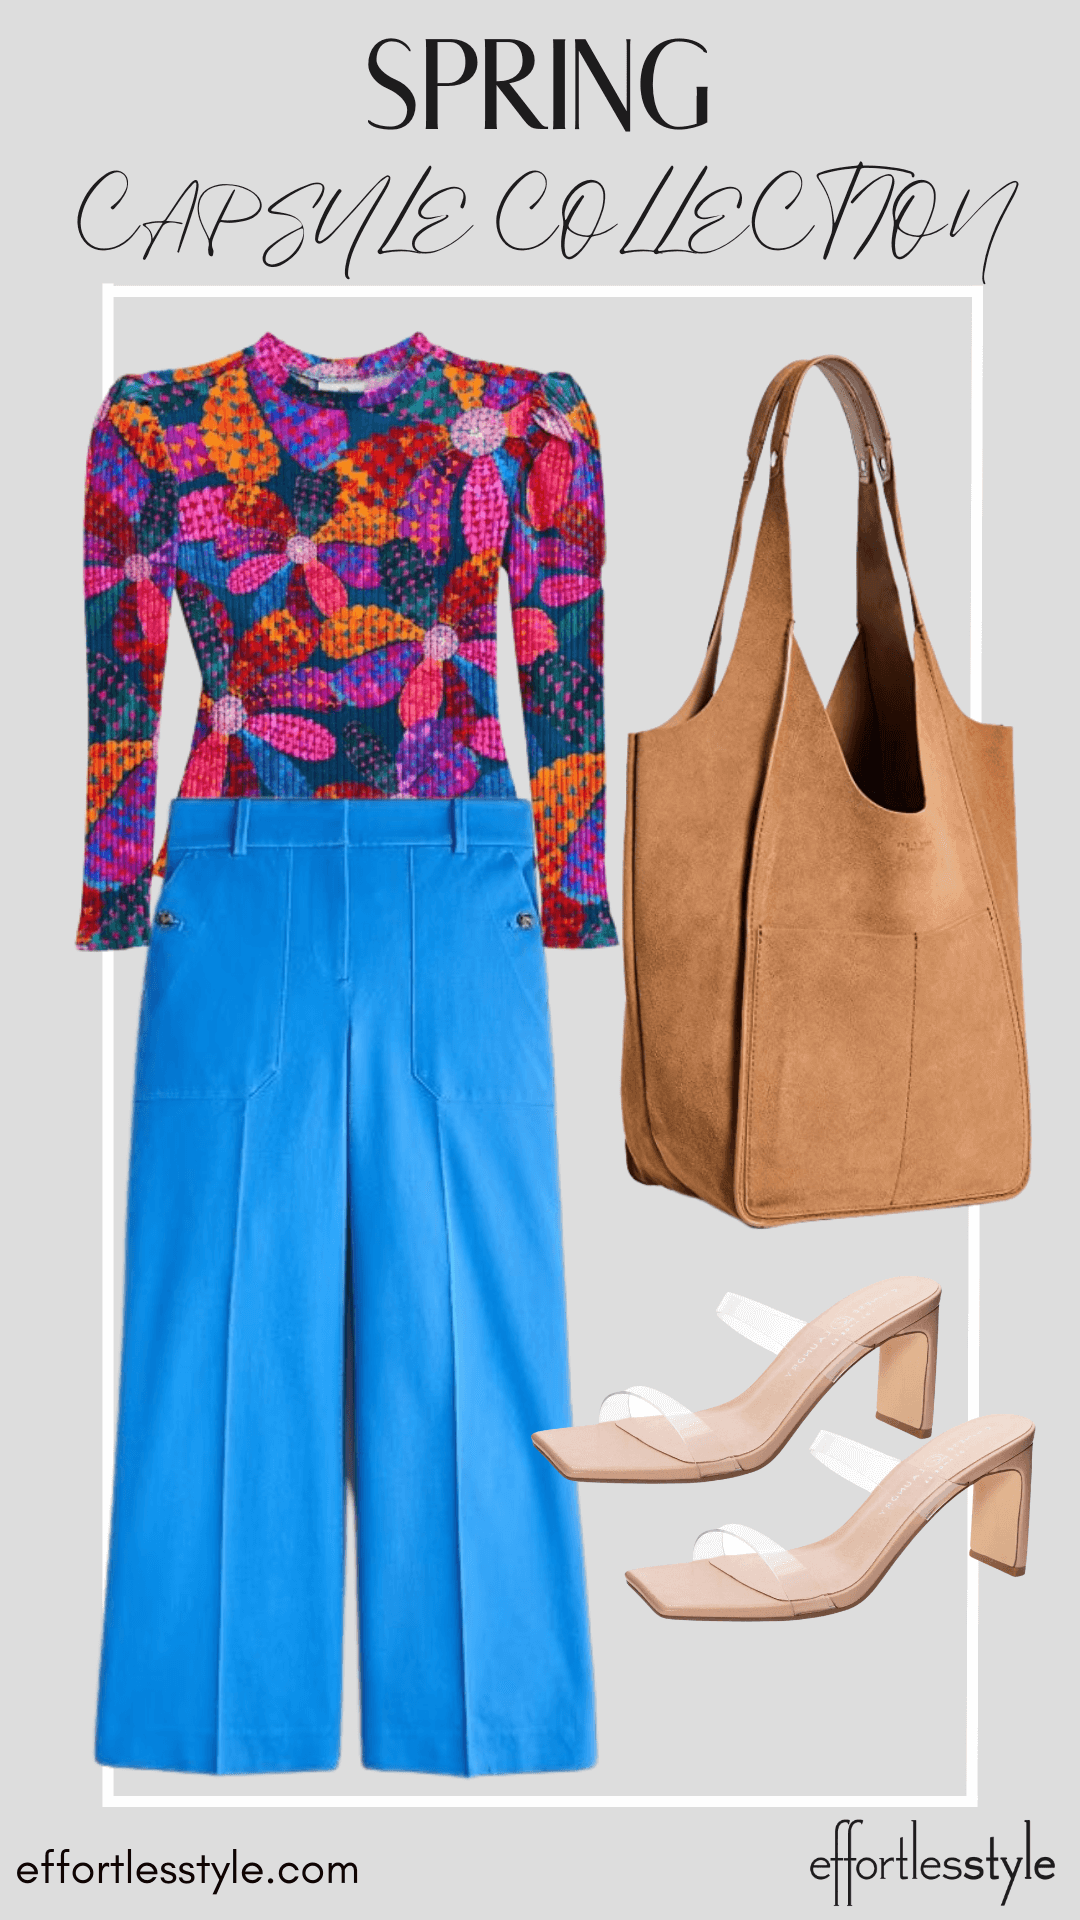 How To Wear Our Spring Capsule Wardrobe - Part 1 Printed Bodysuit & Wide Leg Pants how to wear bright colors together how to wear color to the office Nashville area stylists share style inspiration for spring personal stylists share must have pieces for spring